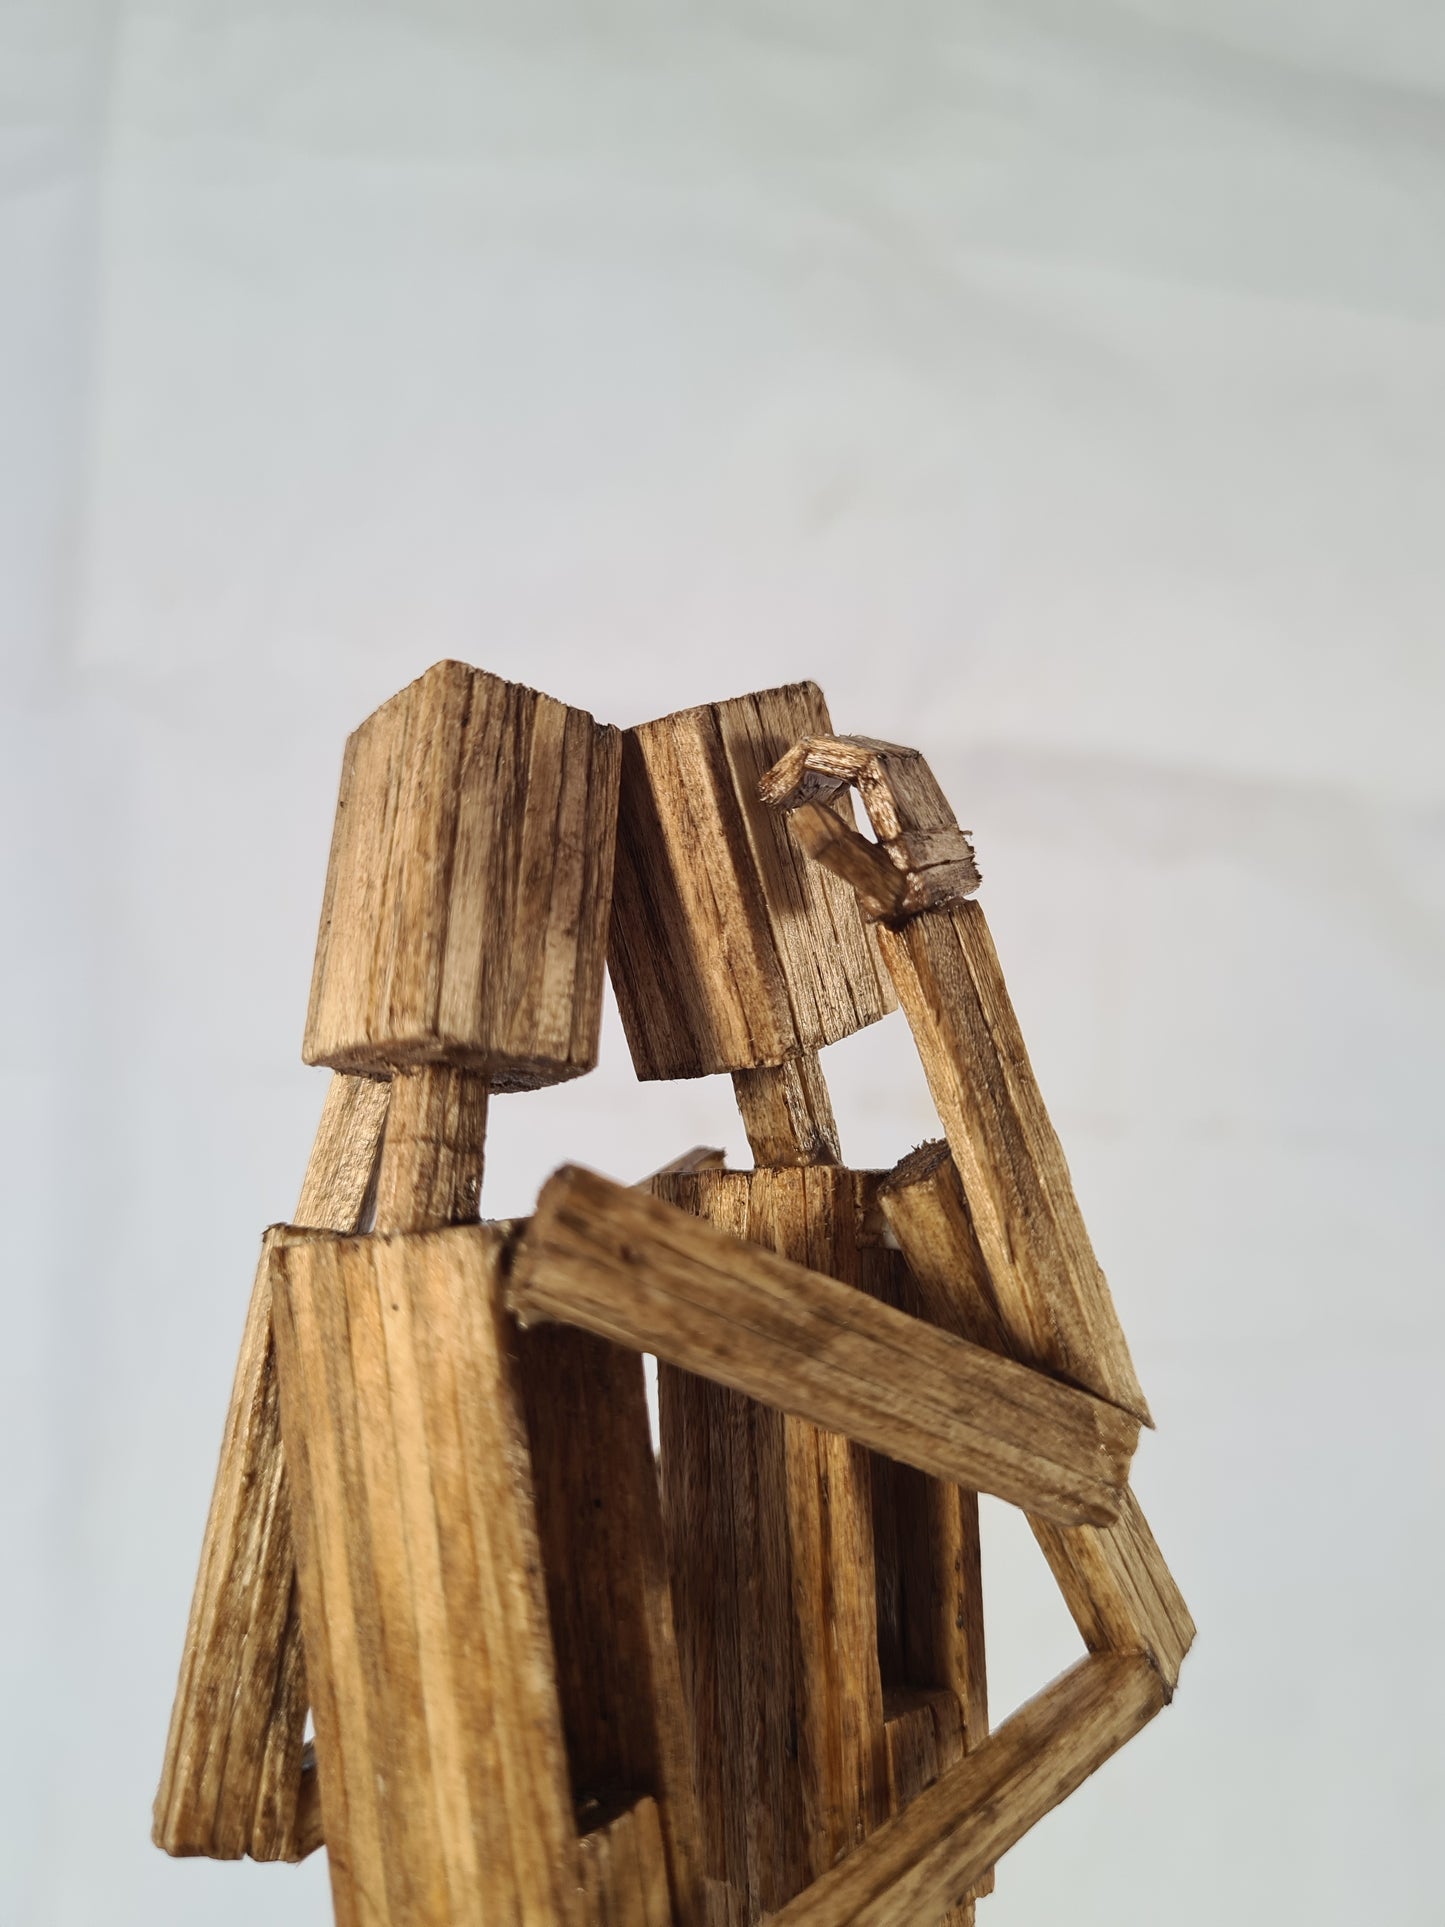 Embraced - Handcrafted Wooden Matchstick Figures - Gifts, Ornaments and Decor By Tiggidy Designs